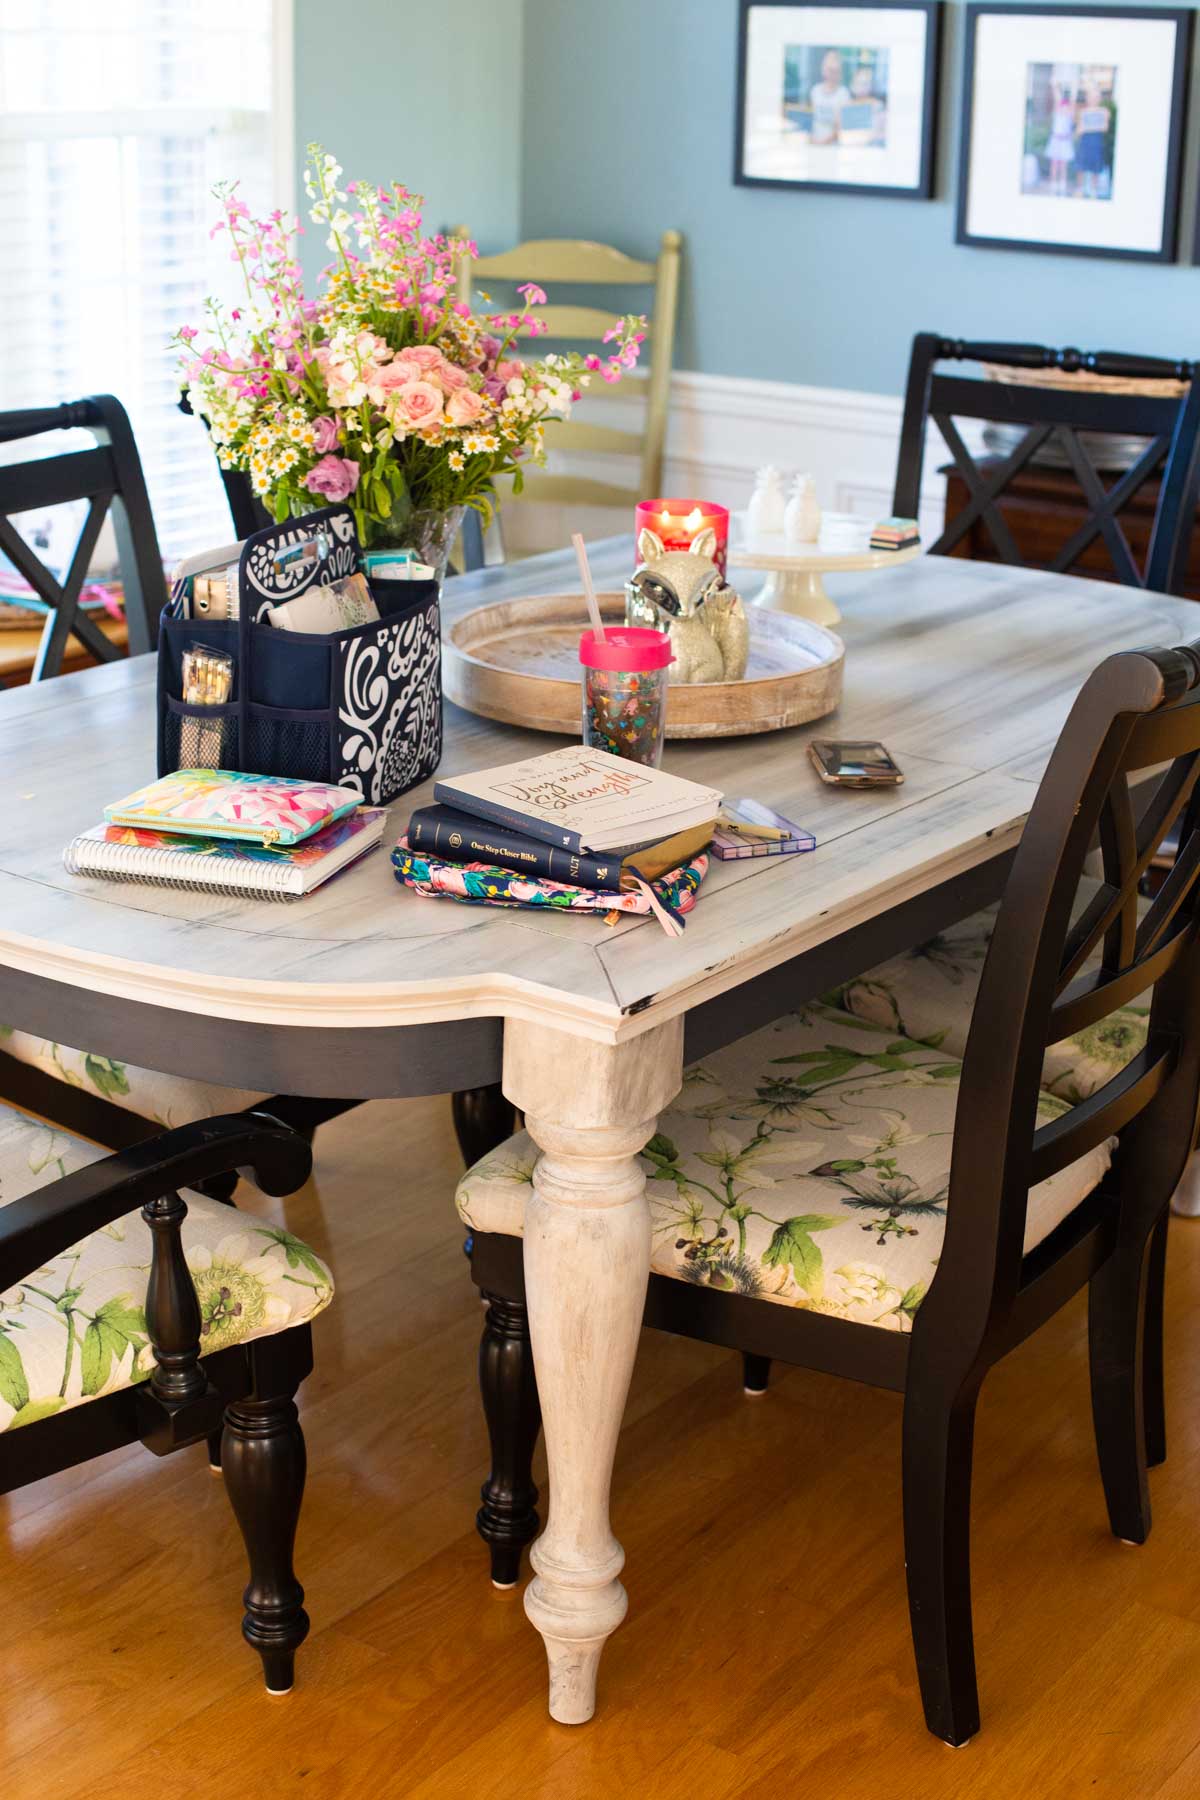 The dining table is set for a mom's morning time with a morning basket, coffee, and fresh flowers.